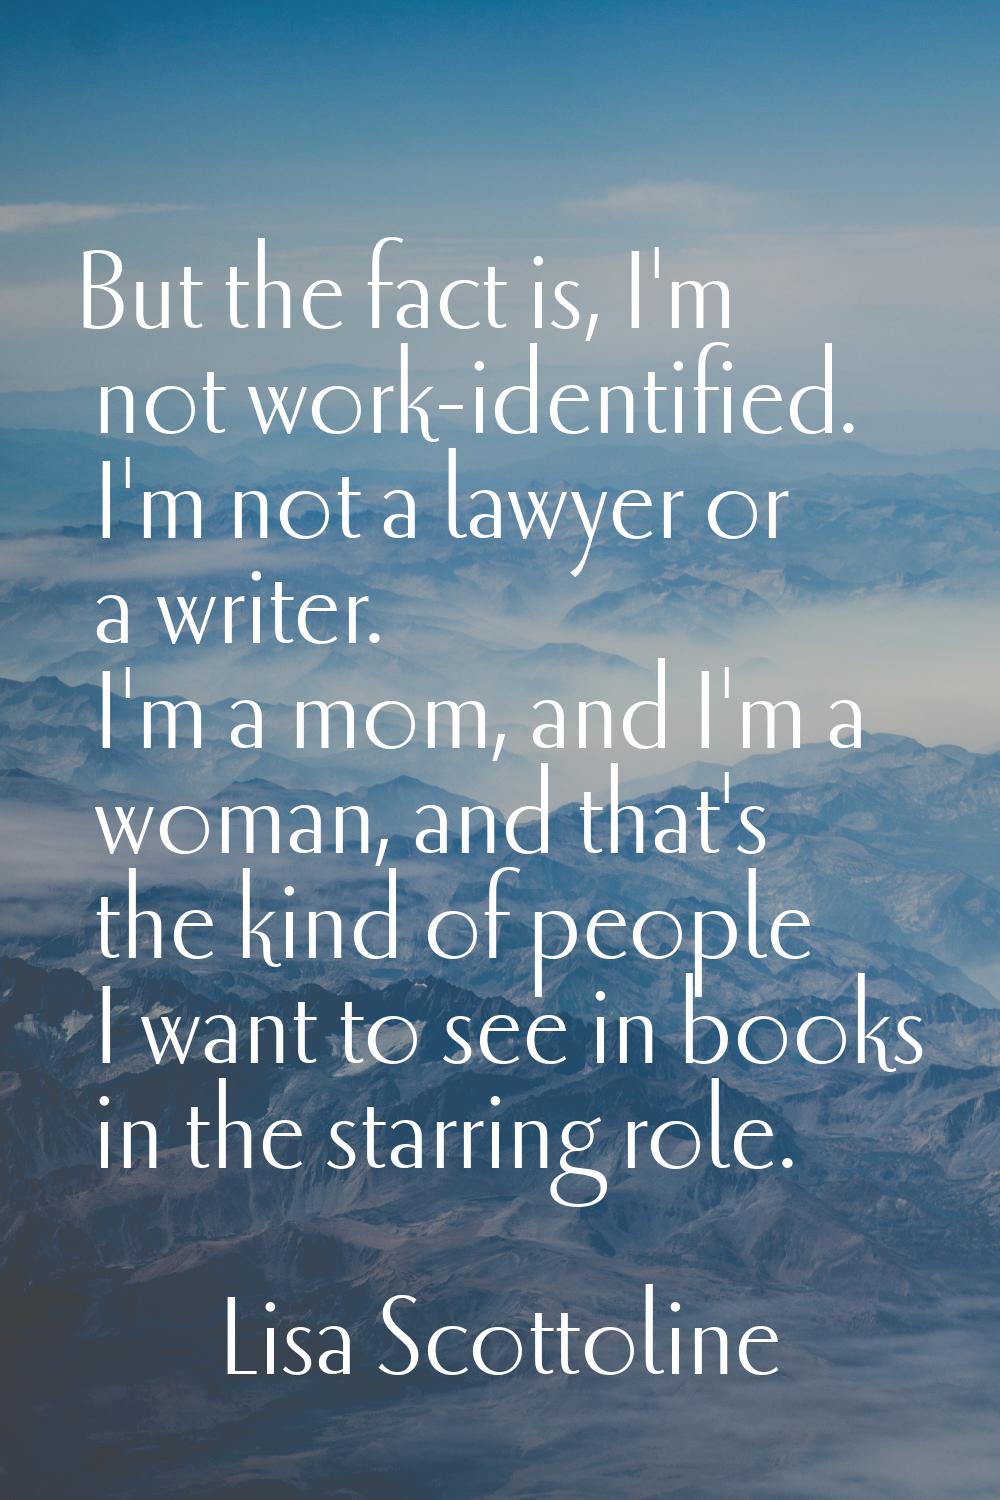 But the fact is, I'm not work-identified. I'm not a lawyer or a writer. I'm a mom, and I'm a woman,